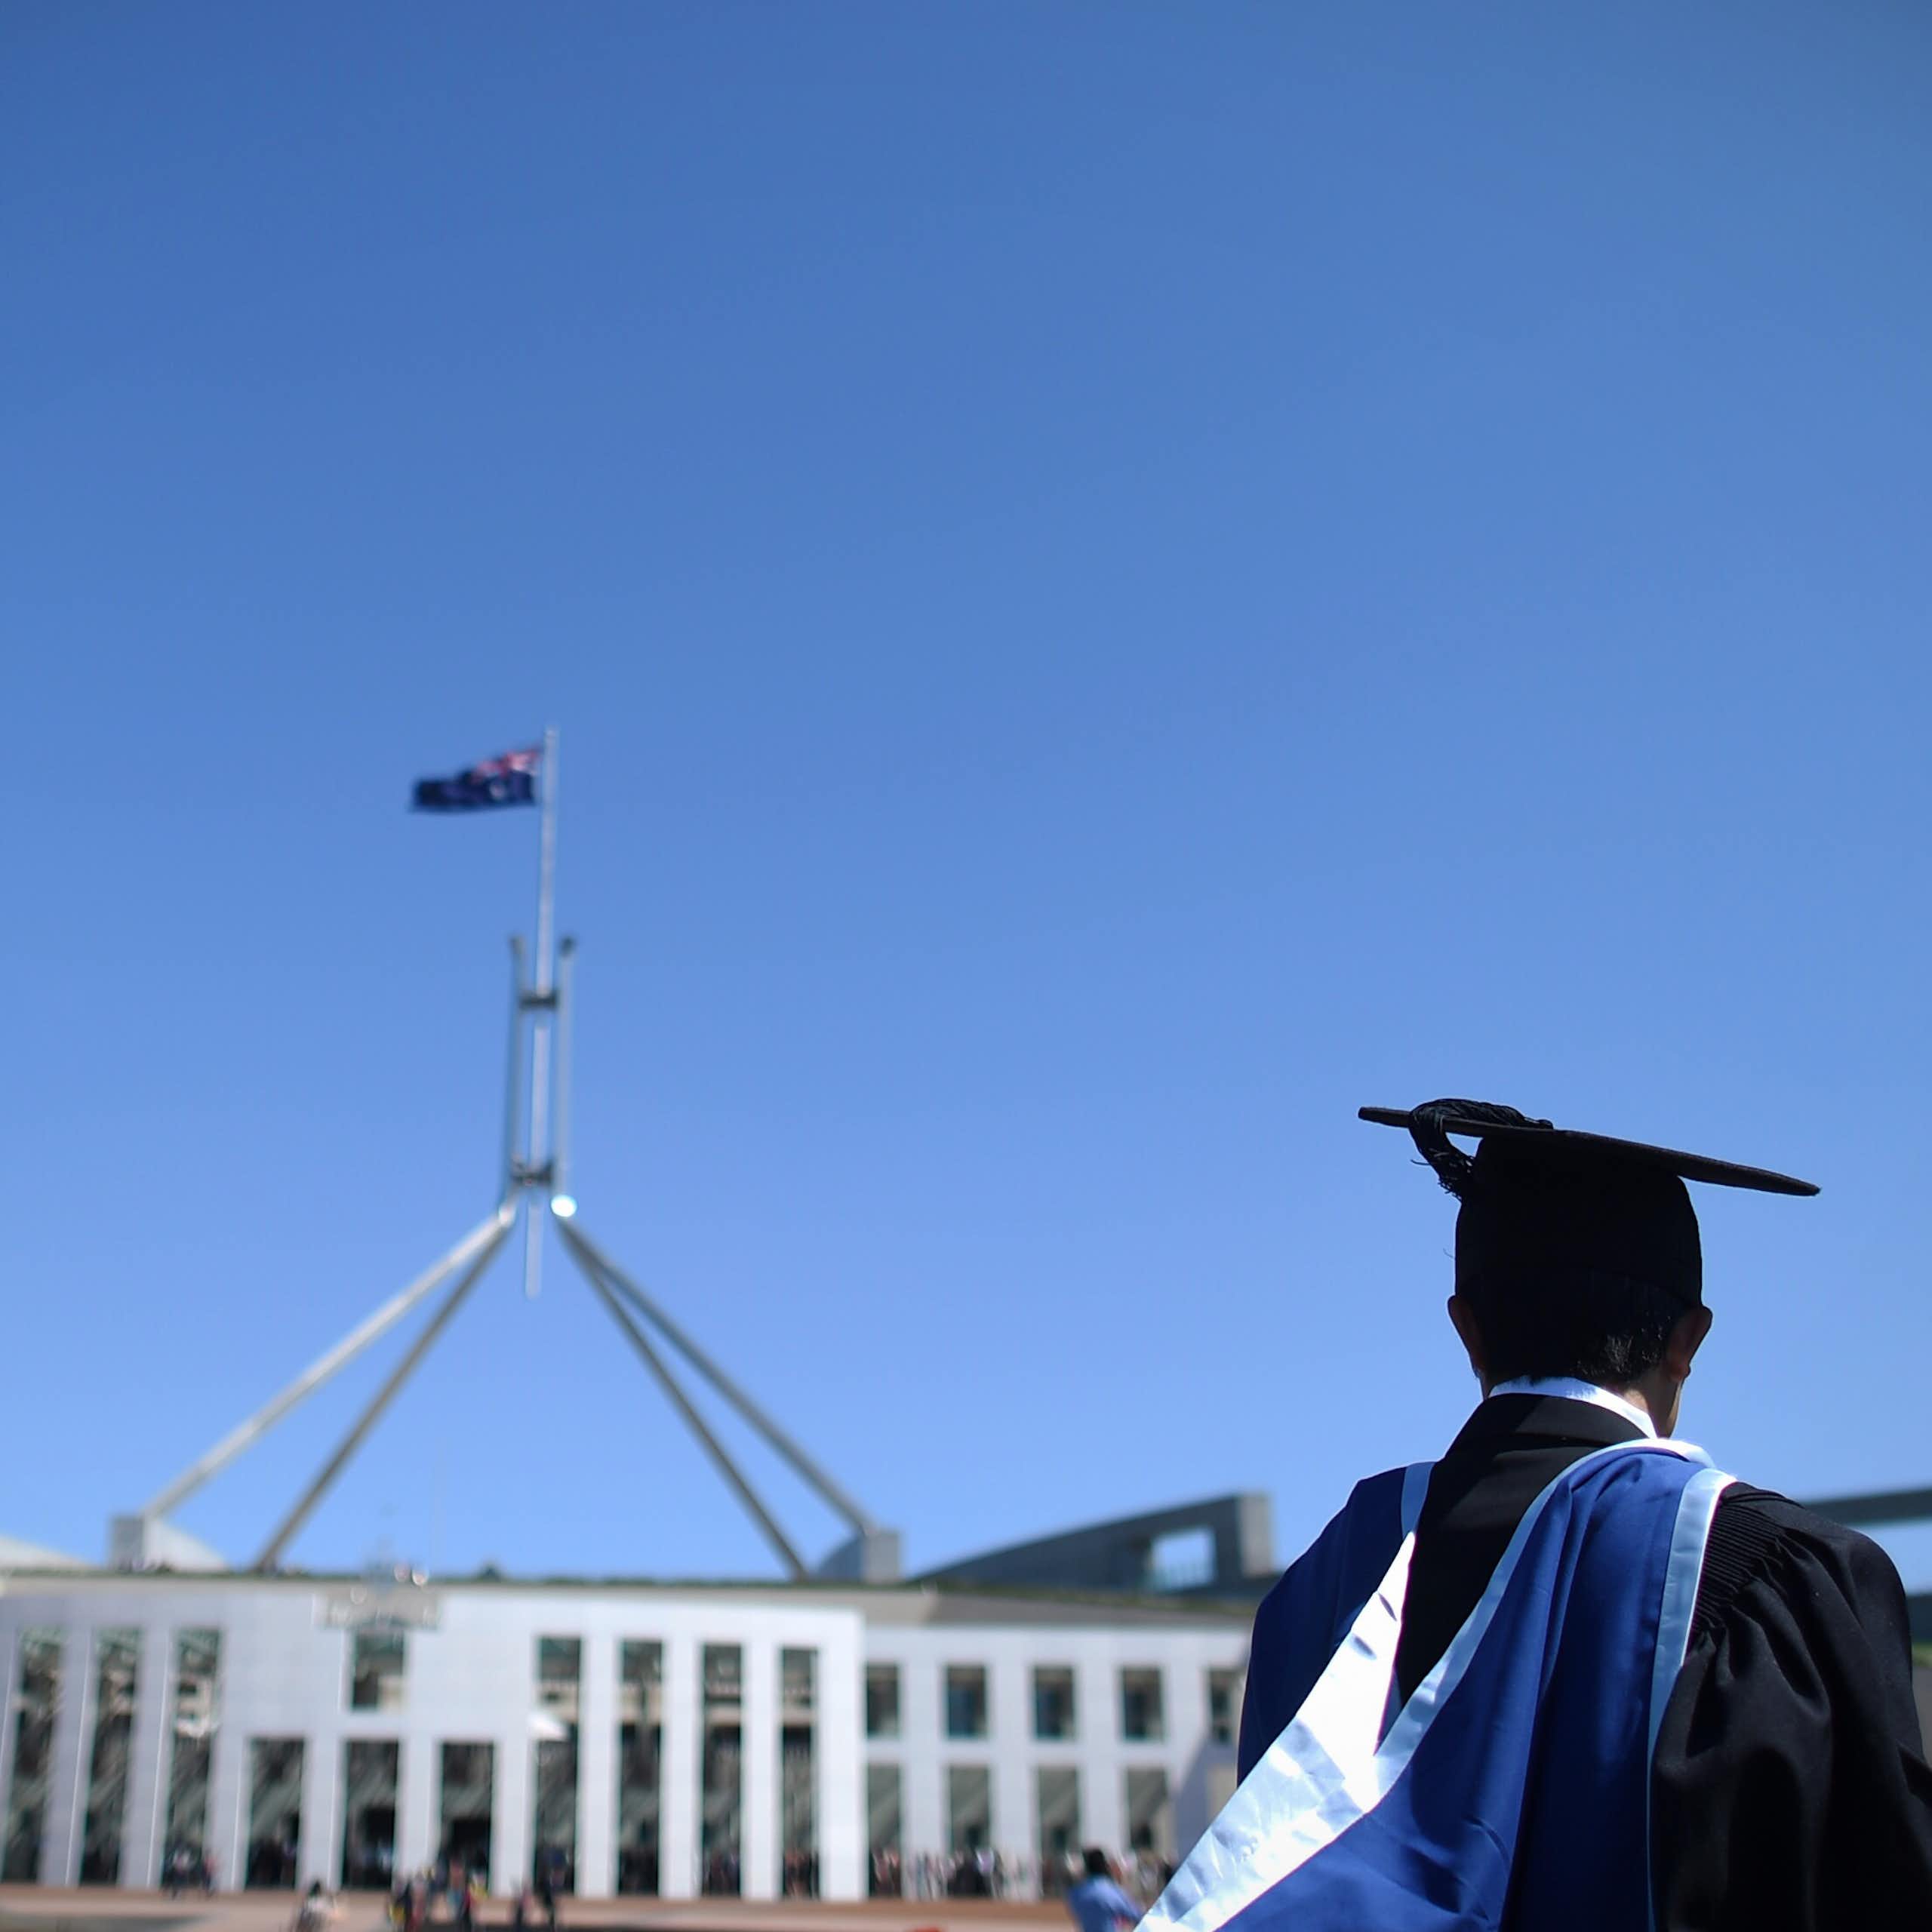 The good news is the government plans to cancel $3 billion in student debt. The bad news is indexation will still be high